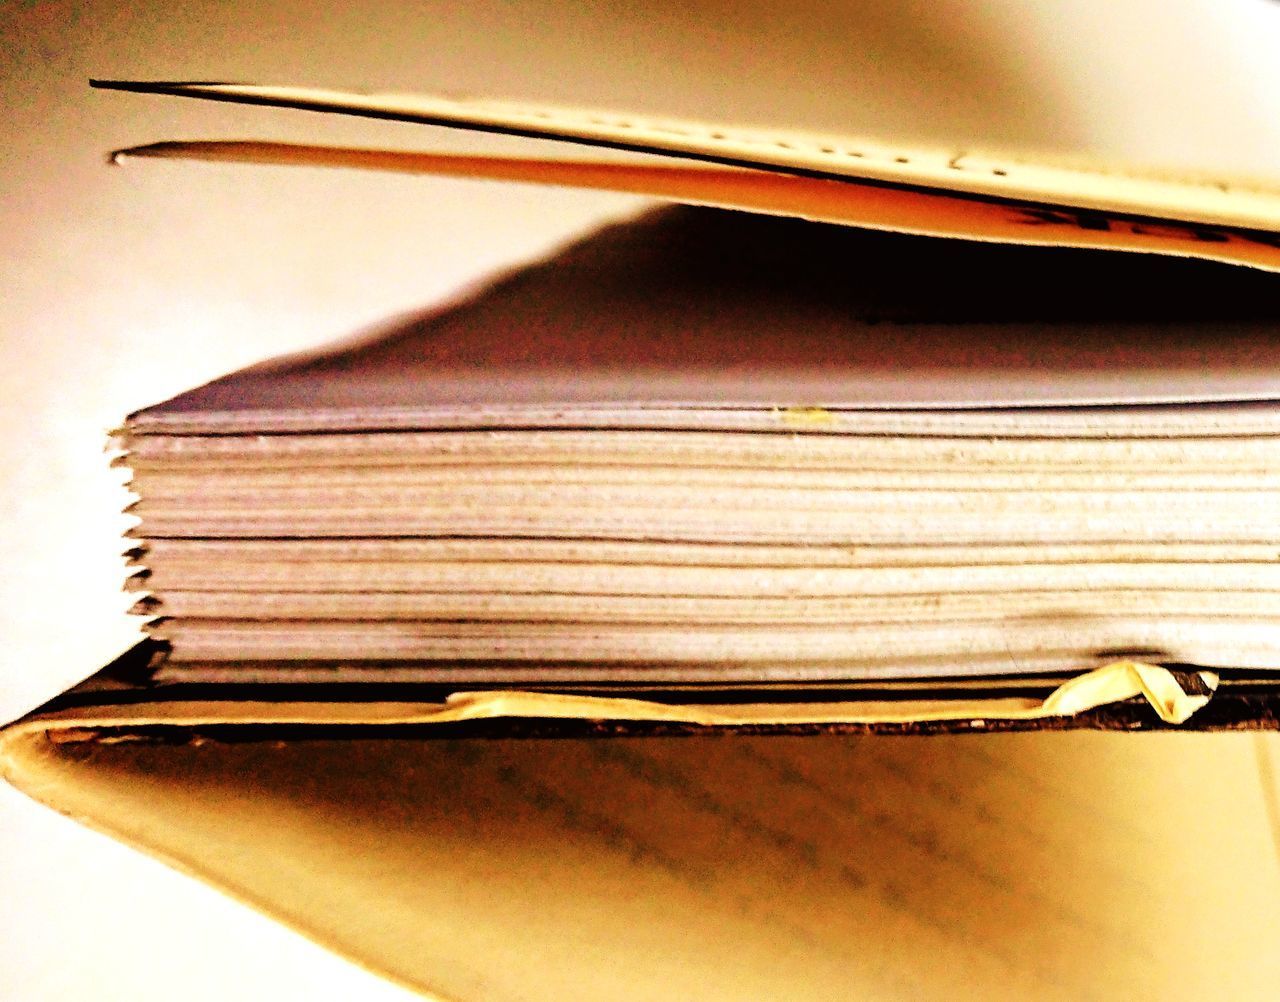 CLOSE-UP OF OPEN BOOK